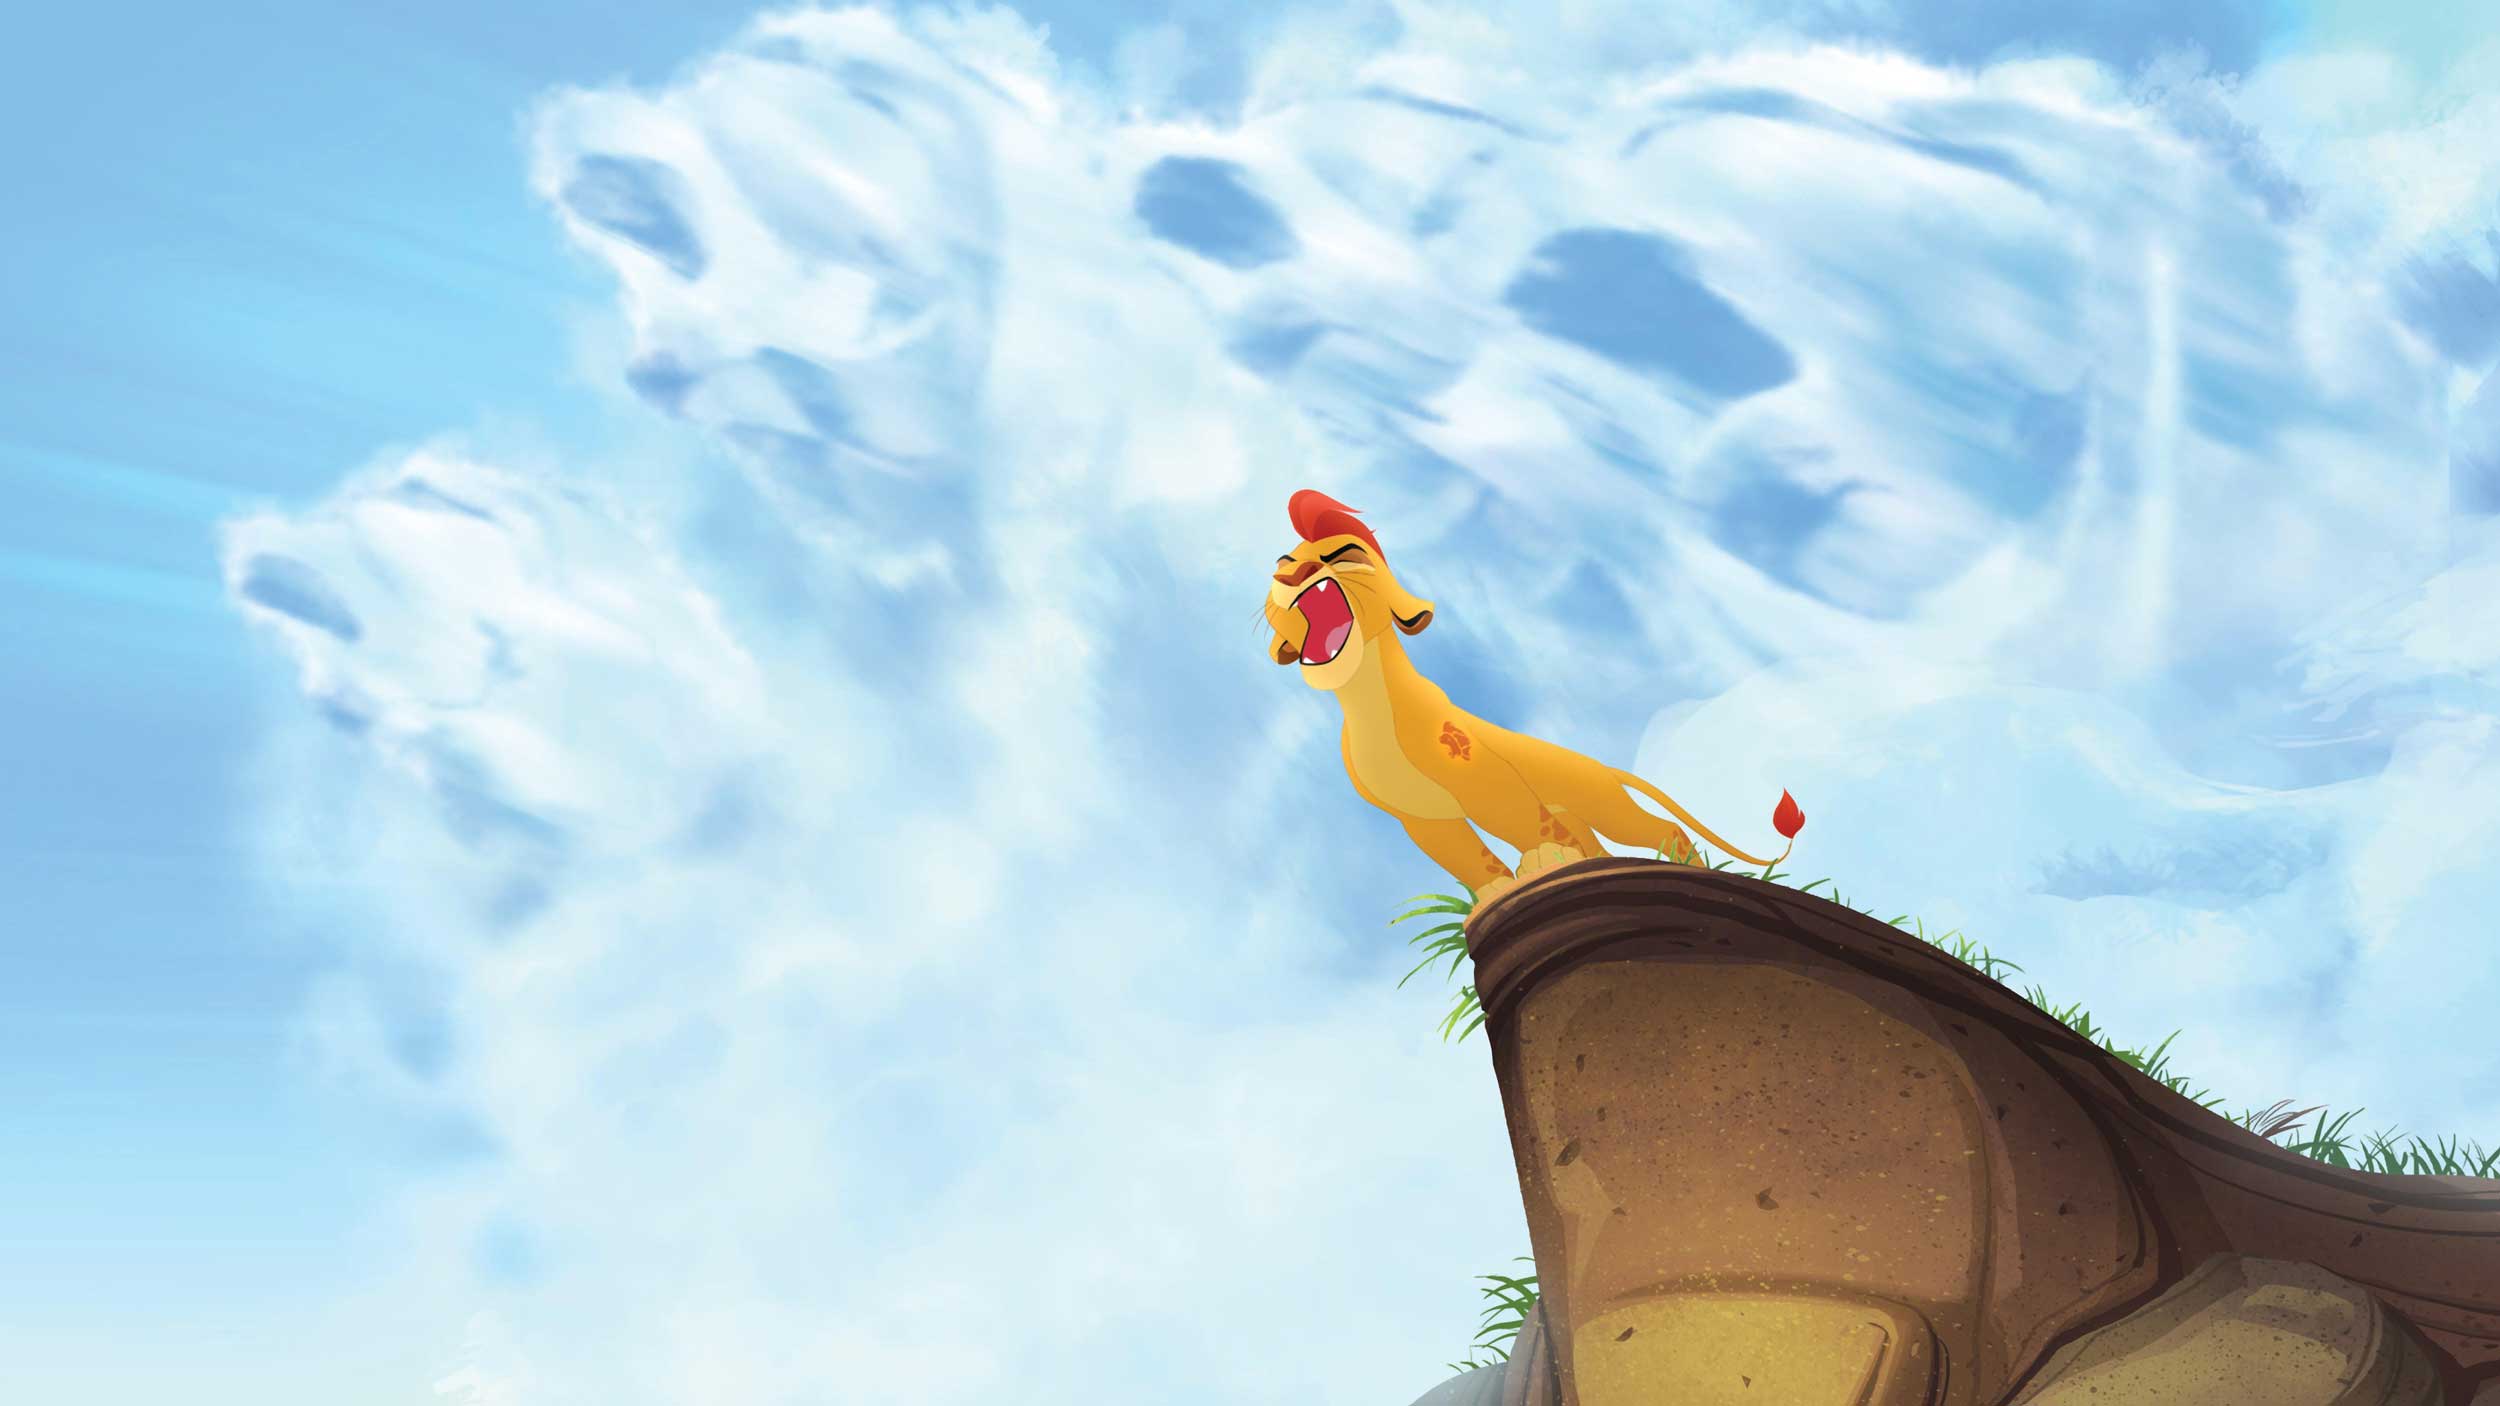 Disney Junior’s ‘The Lion Guard: Return of the Roar’ Now Available on DVD